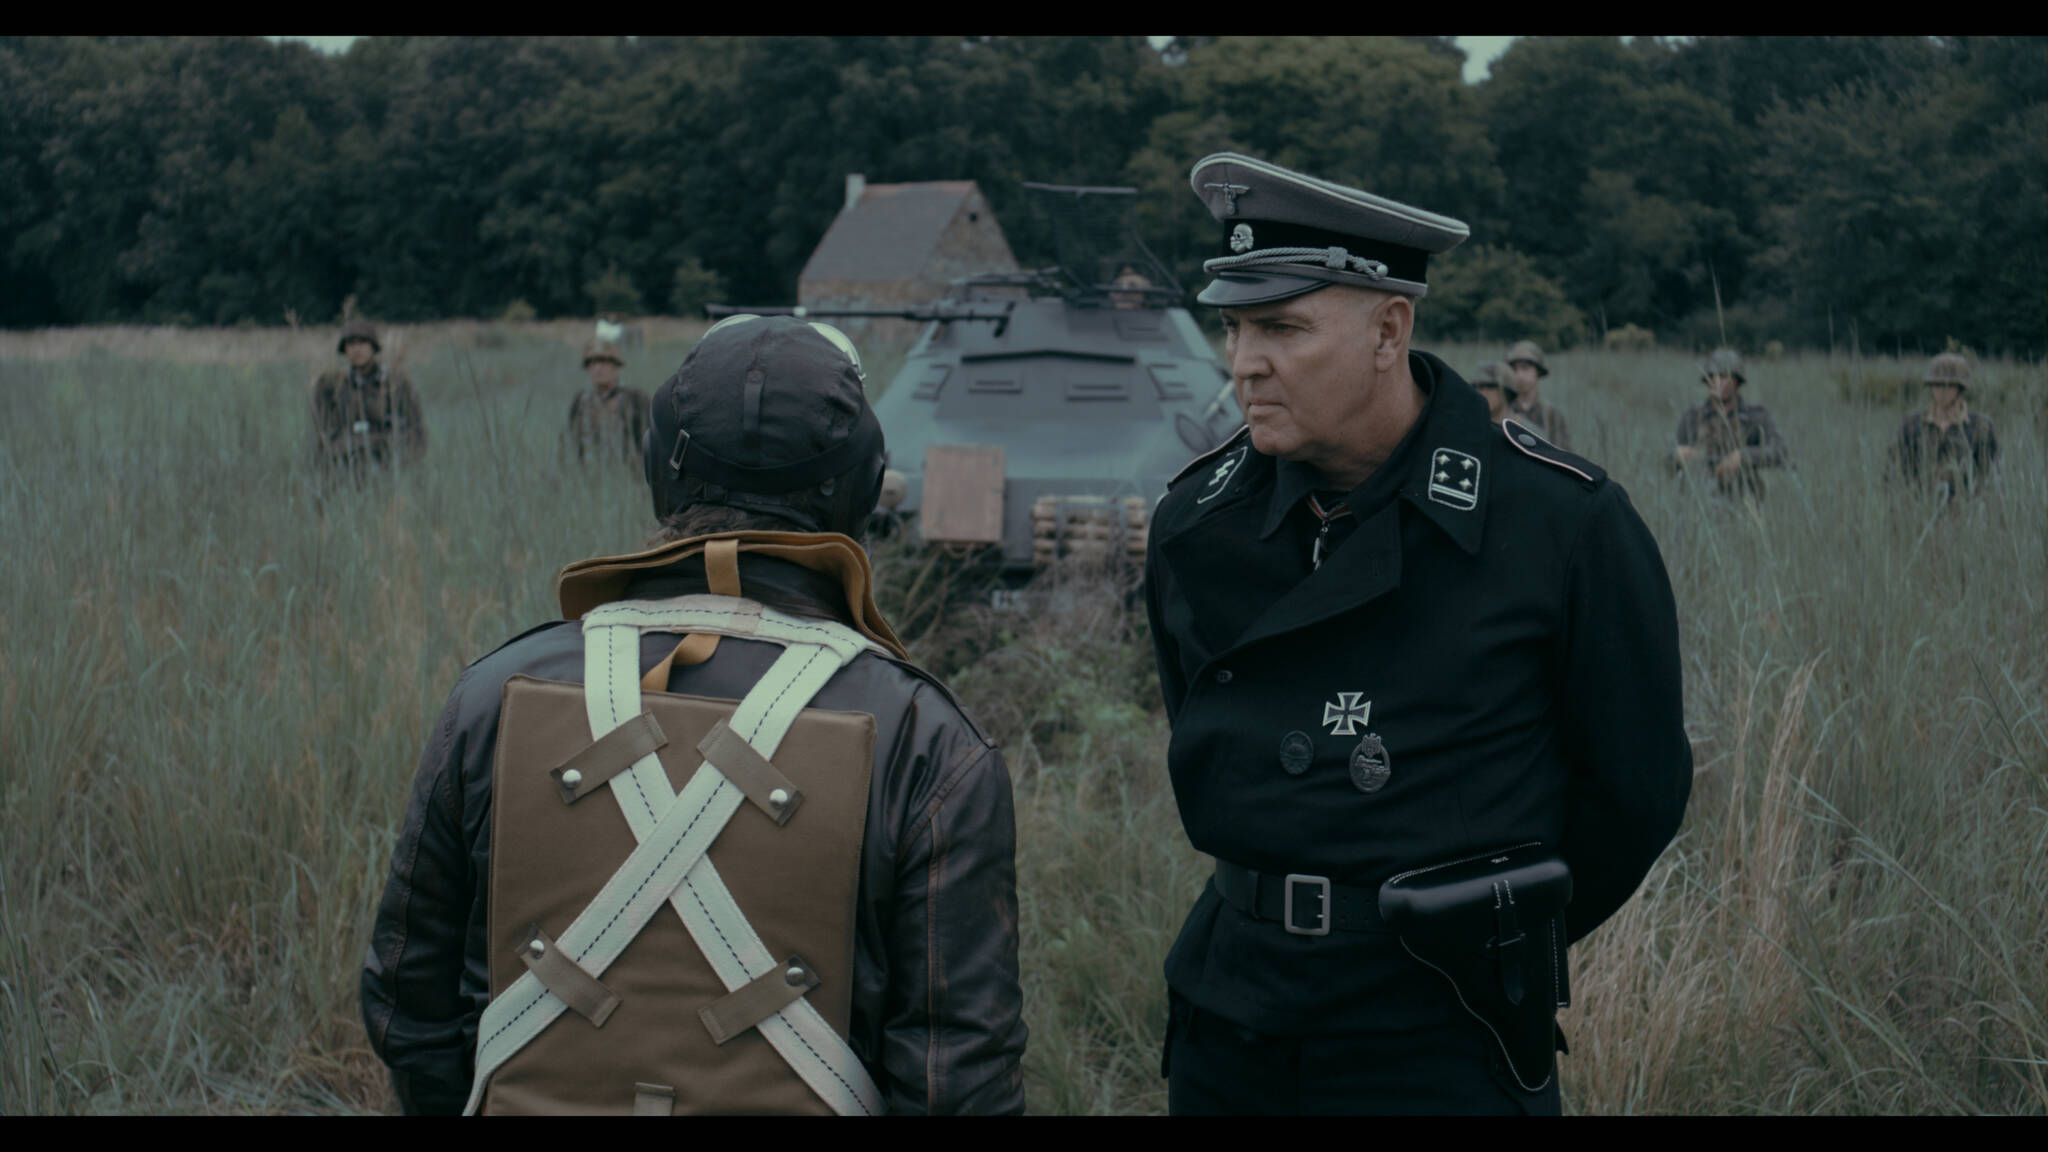 Arnold Vosloo as Colonel Bach addresses American soldiers in the latest film, “Condor's Nest” in theaters and digital release Friday.  (Courtesy photo/PMKBNC)